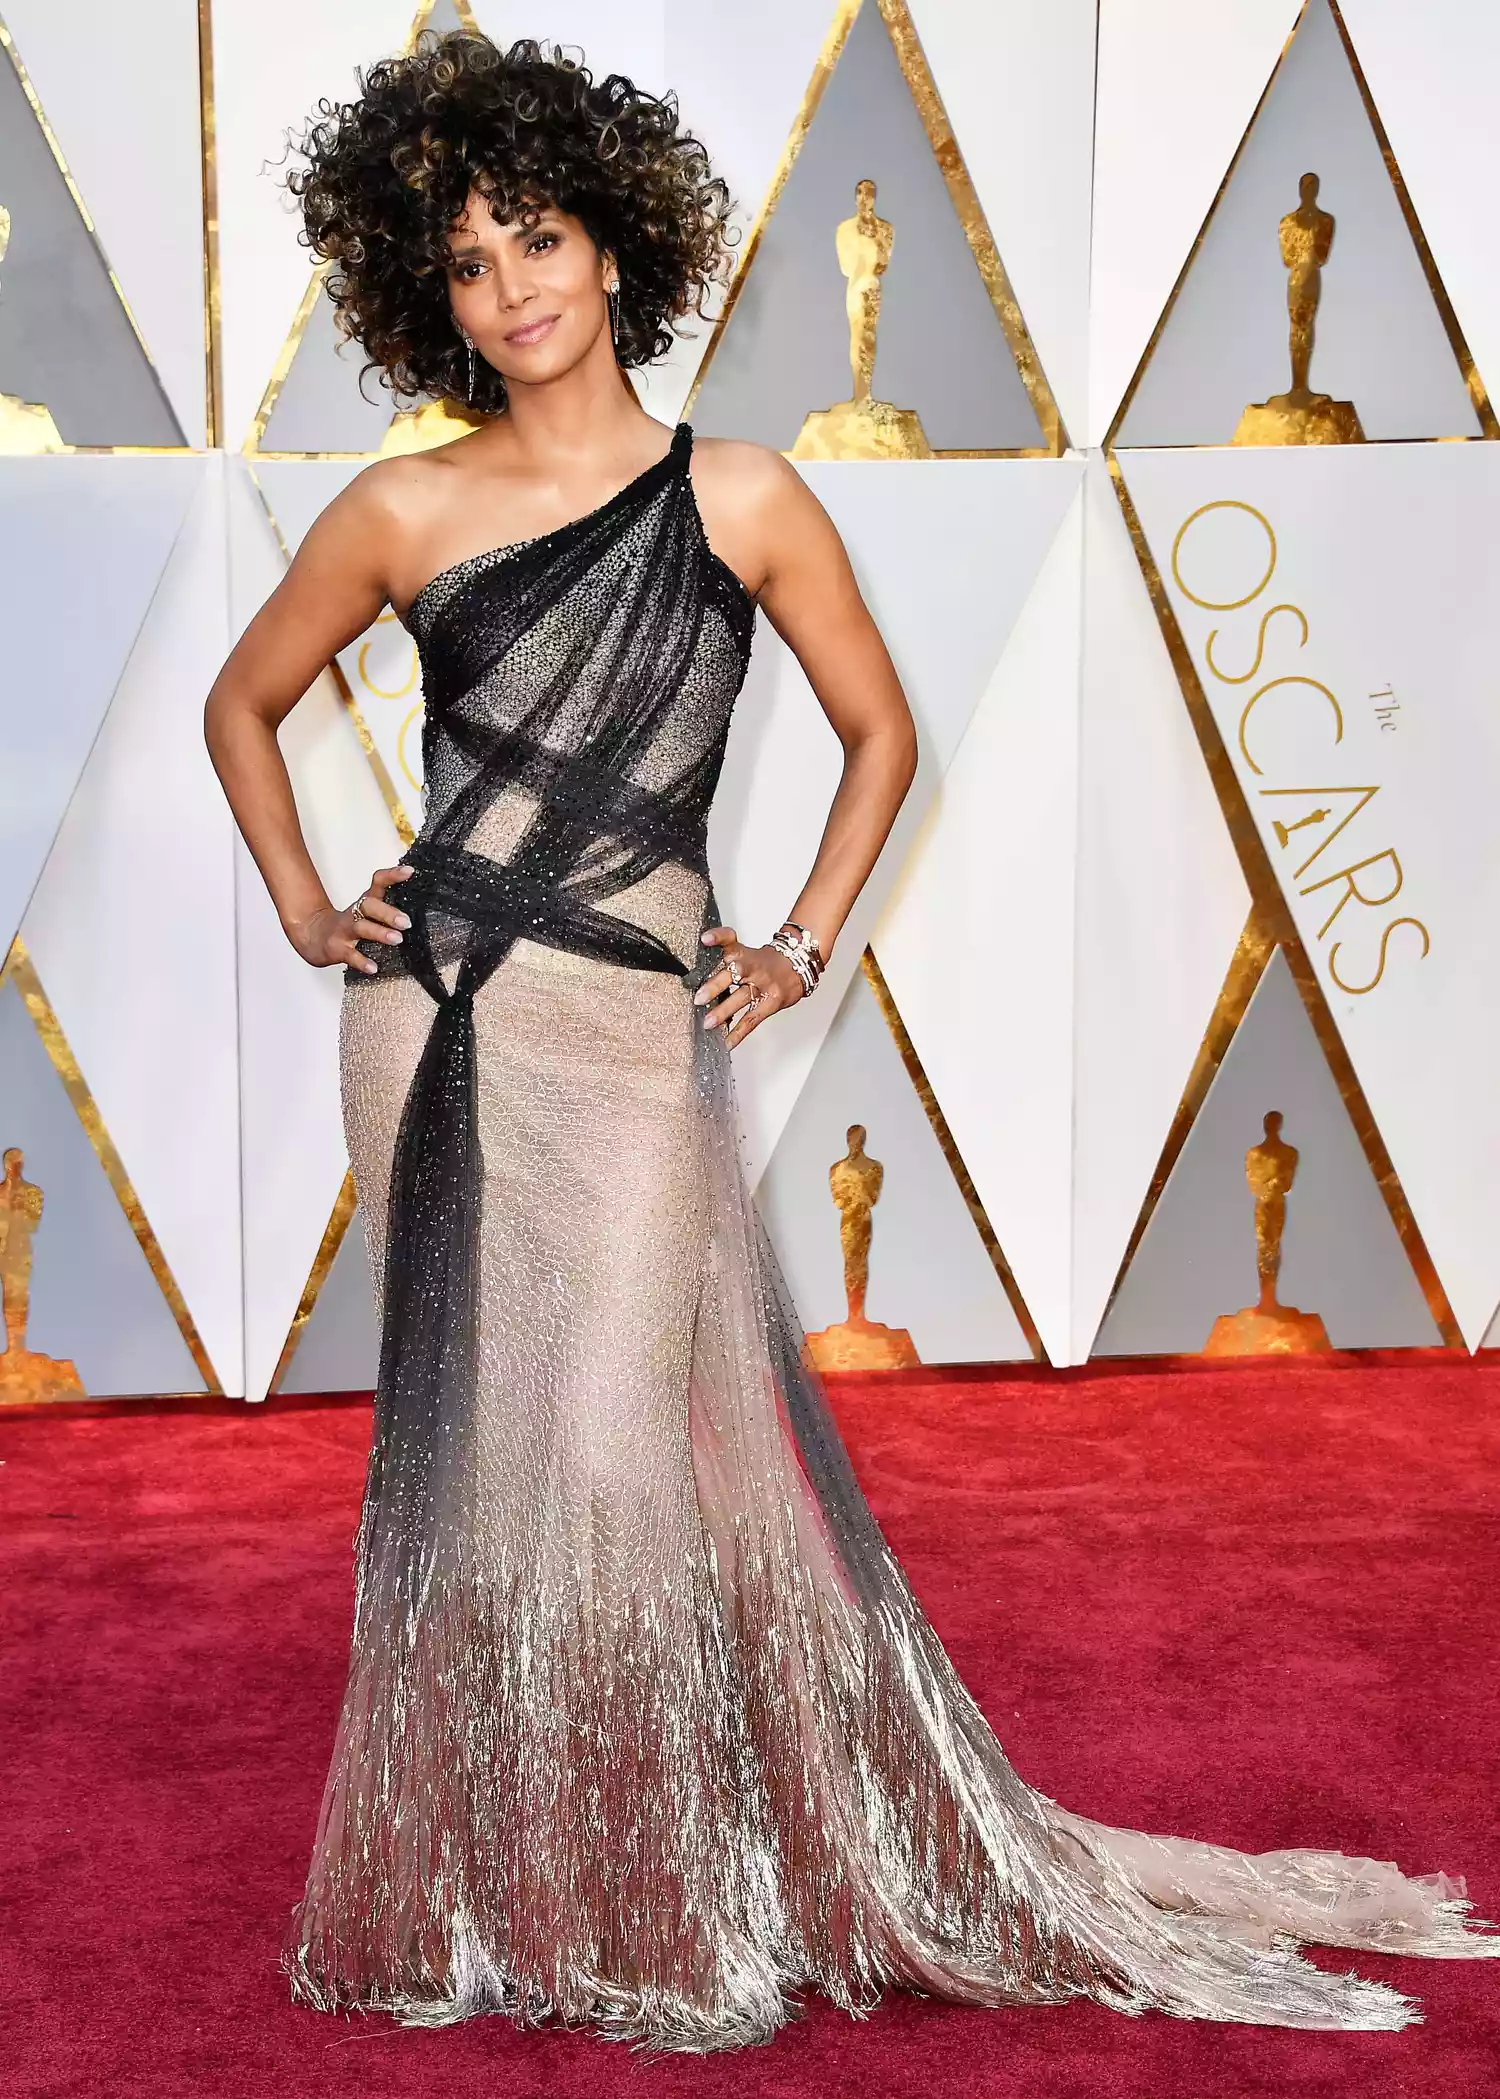 Halle Berry at the 2017 Oscars.